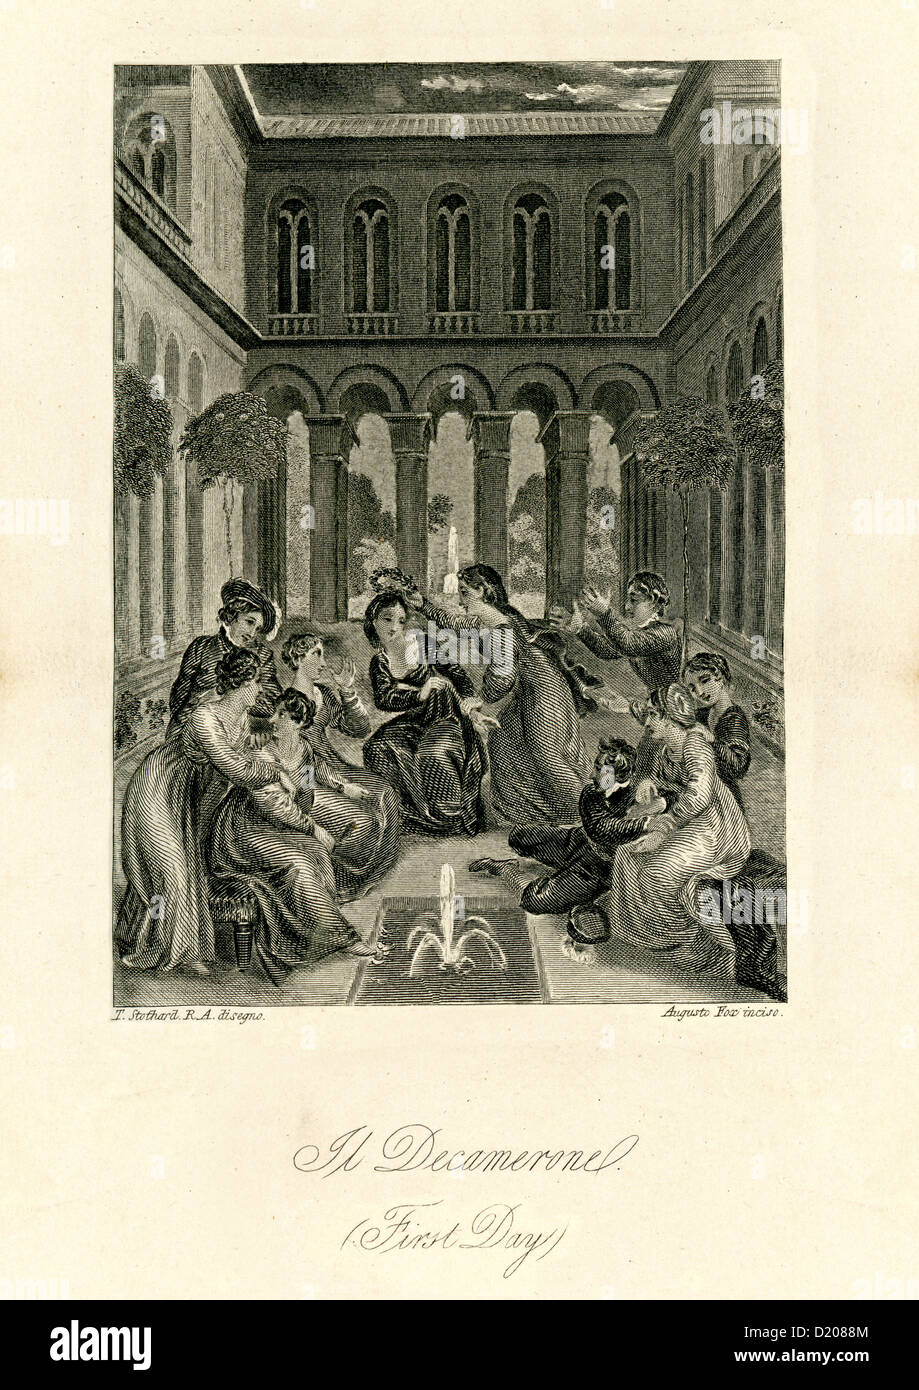 Engraving showing the Tenth day of the Decameron. The Decameron is a 14th-century medieval allegory by Giovanni Boccaccio, Stock Photo